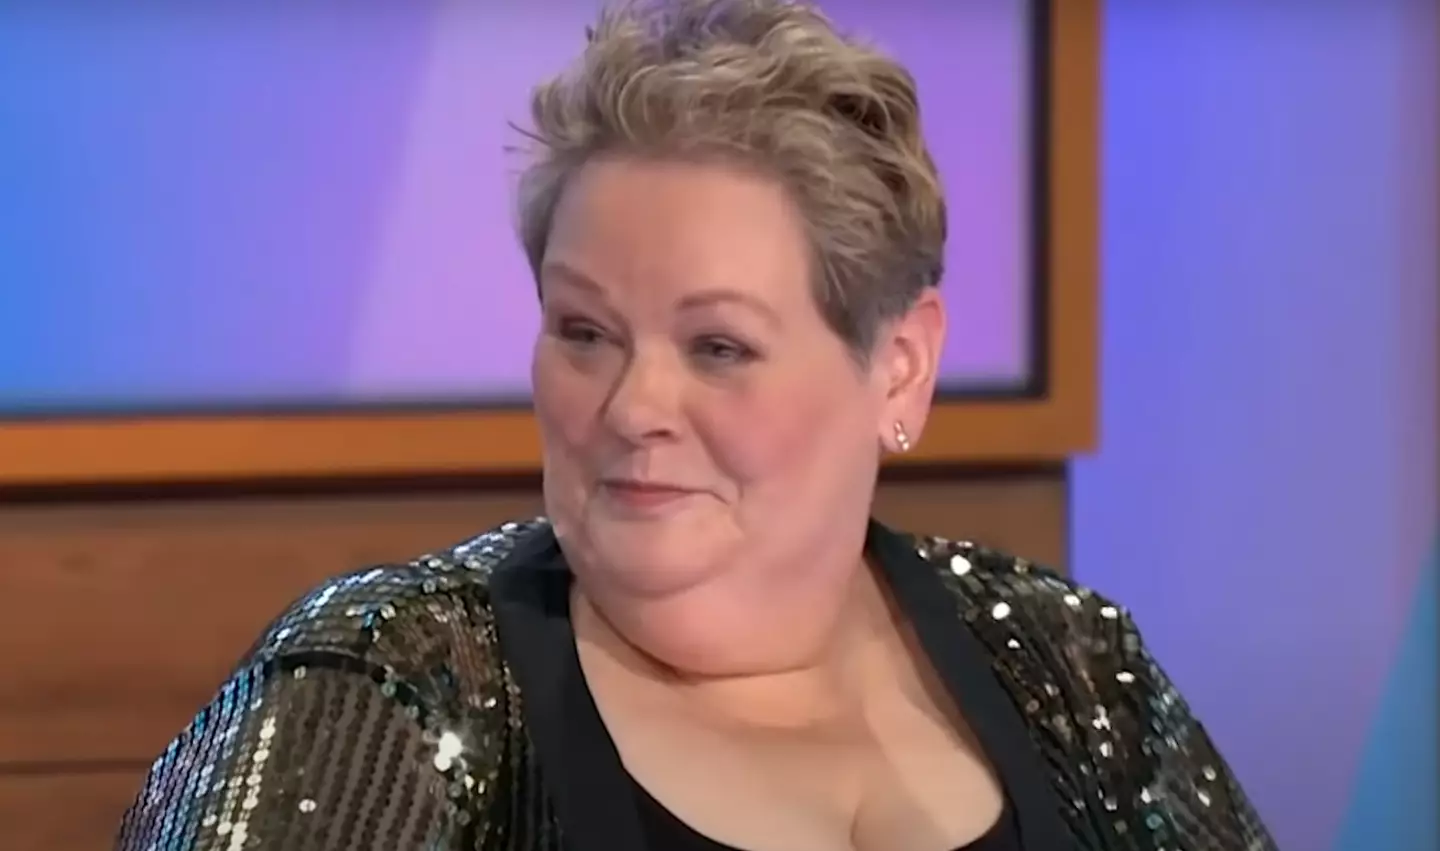 Anne Hegerty has said she doesn't want any other Chasers to join.